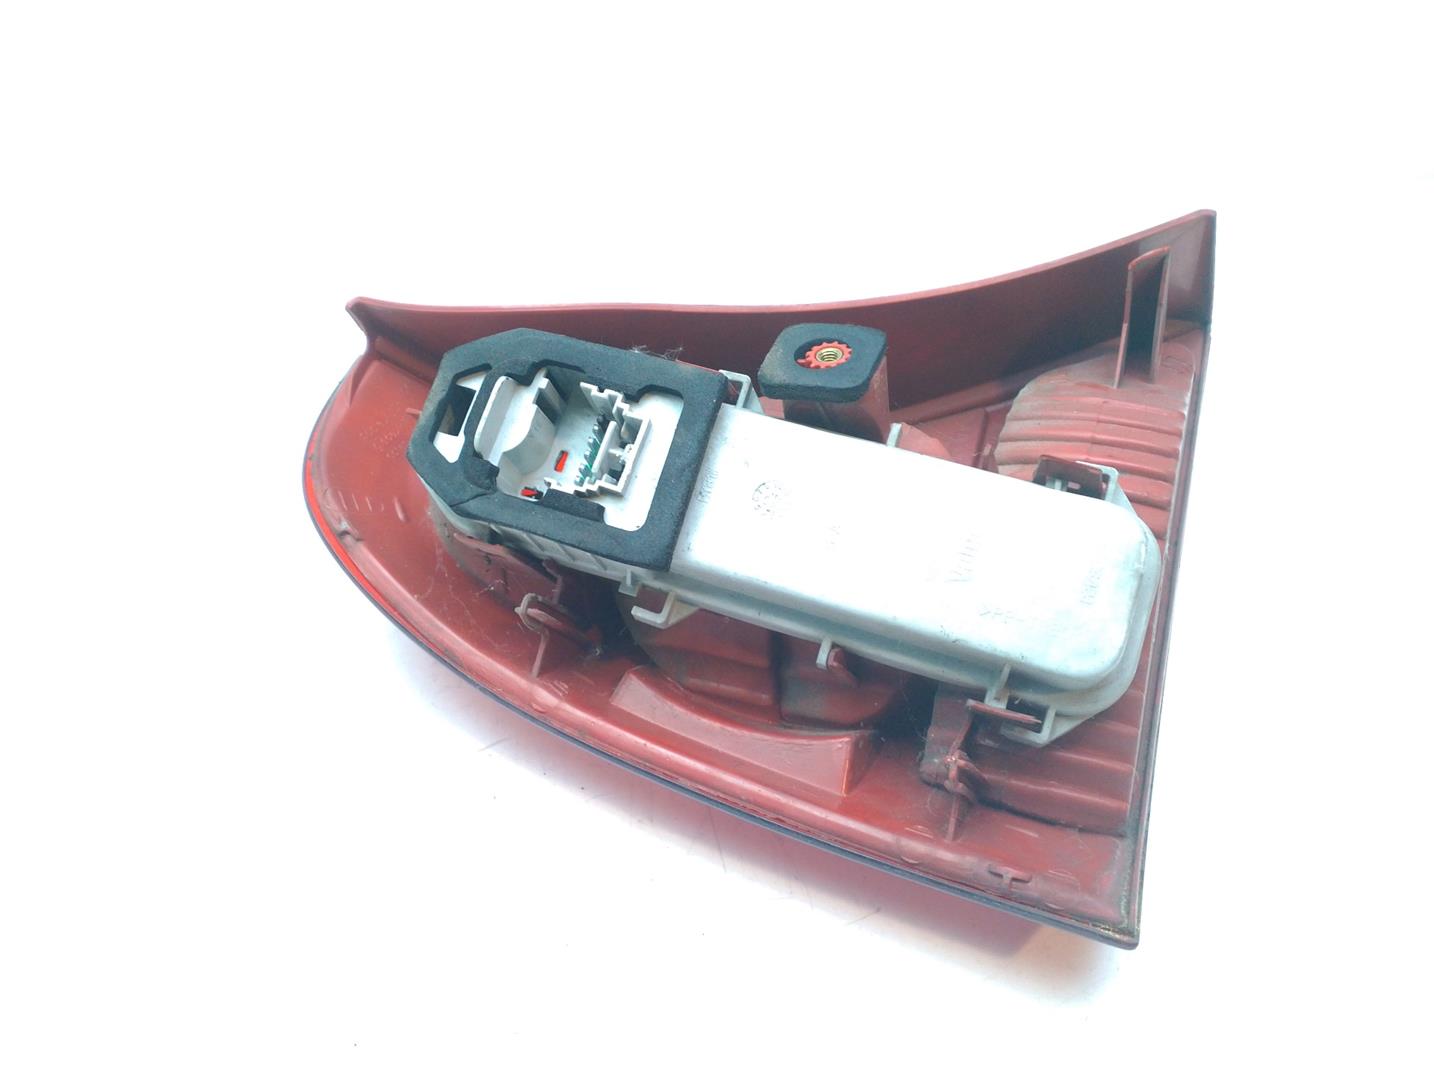 RENAULT Clio 3 generation (2005-2012) Rear Right Taillight Lamp 8200917487 22499648